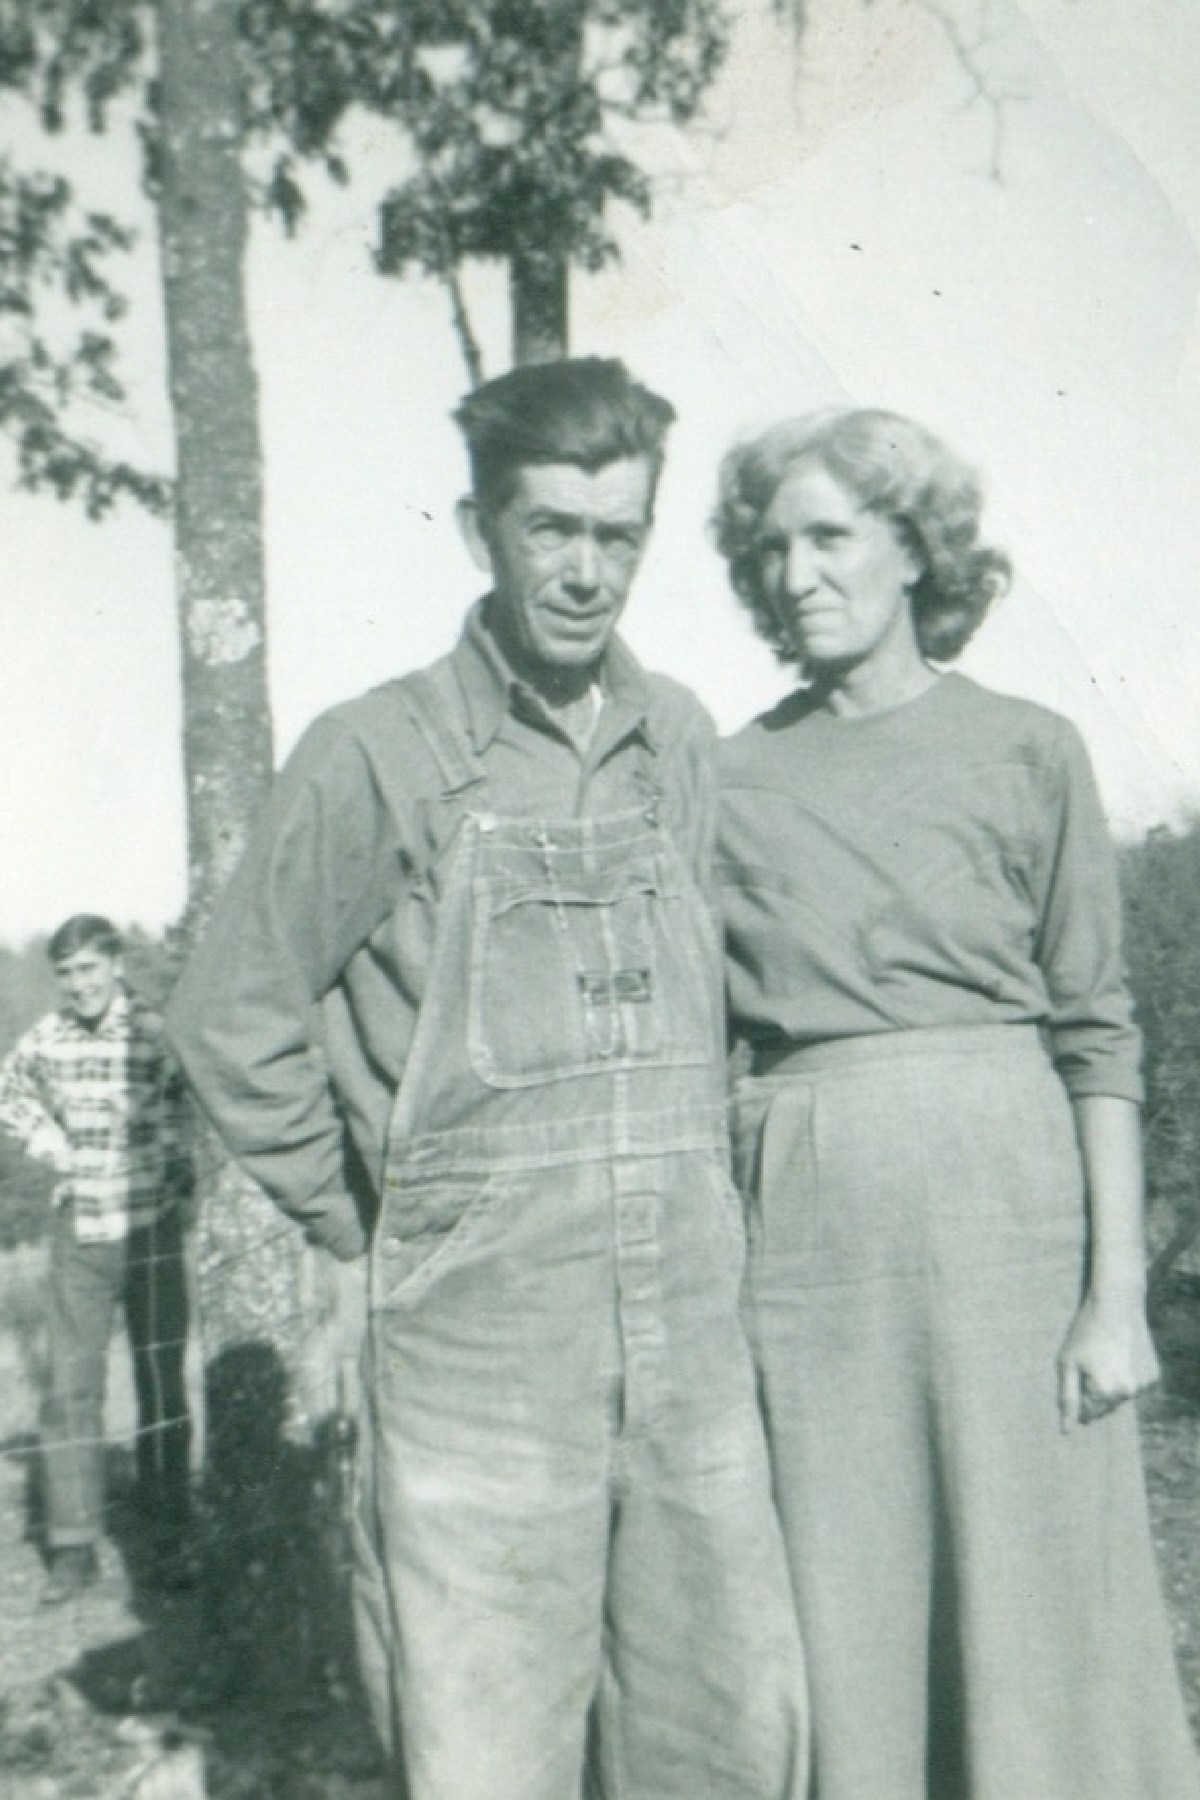 Frank and Willa Keel - Kenneth Crase in the background - abt 1953